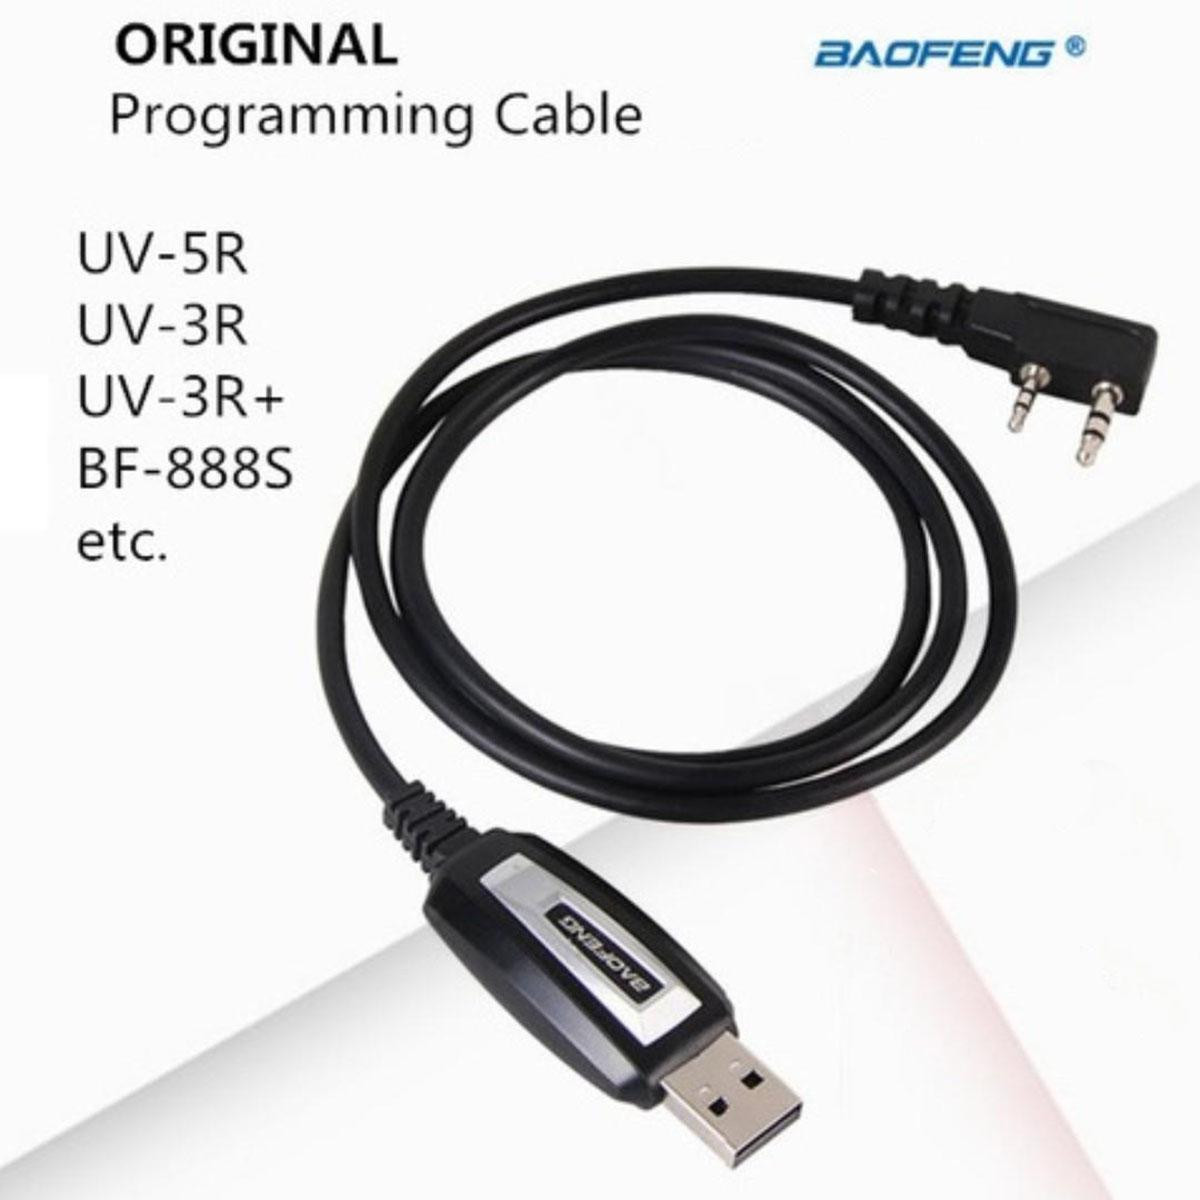 Programming Cable for Two Way Talkie Walkie Baofeng UV-5R,BF-888S,U...